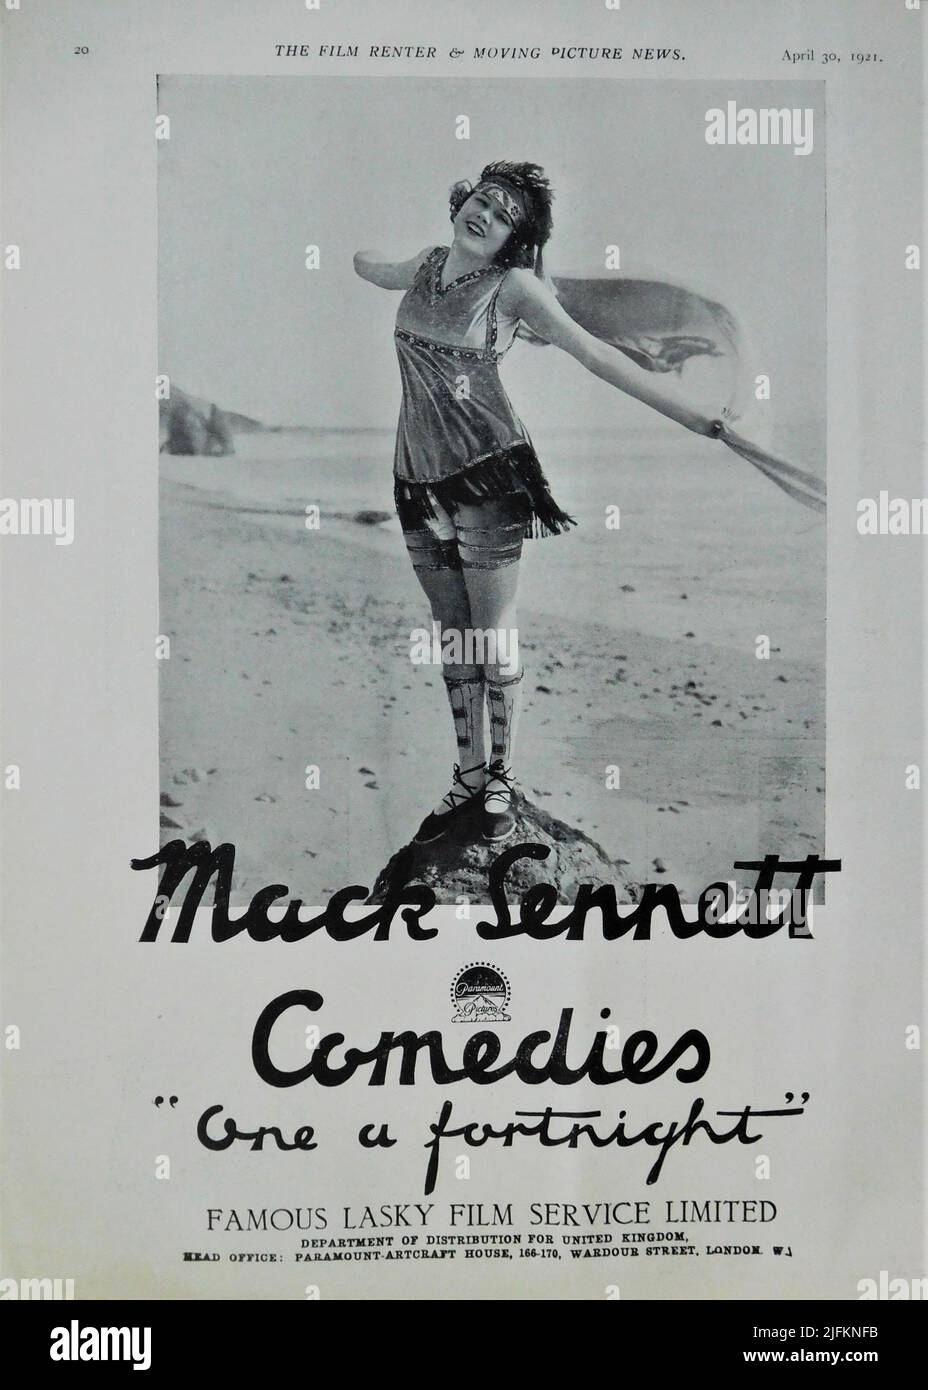 British Trade Ad from 1921 of a MACK SENNETT BATHING BEAUTY in MACK SENNETT COMEDIES : 'one a fortnight' from Famous Lasky Film Service Ltd / Paramount Pictures Stock Photo